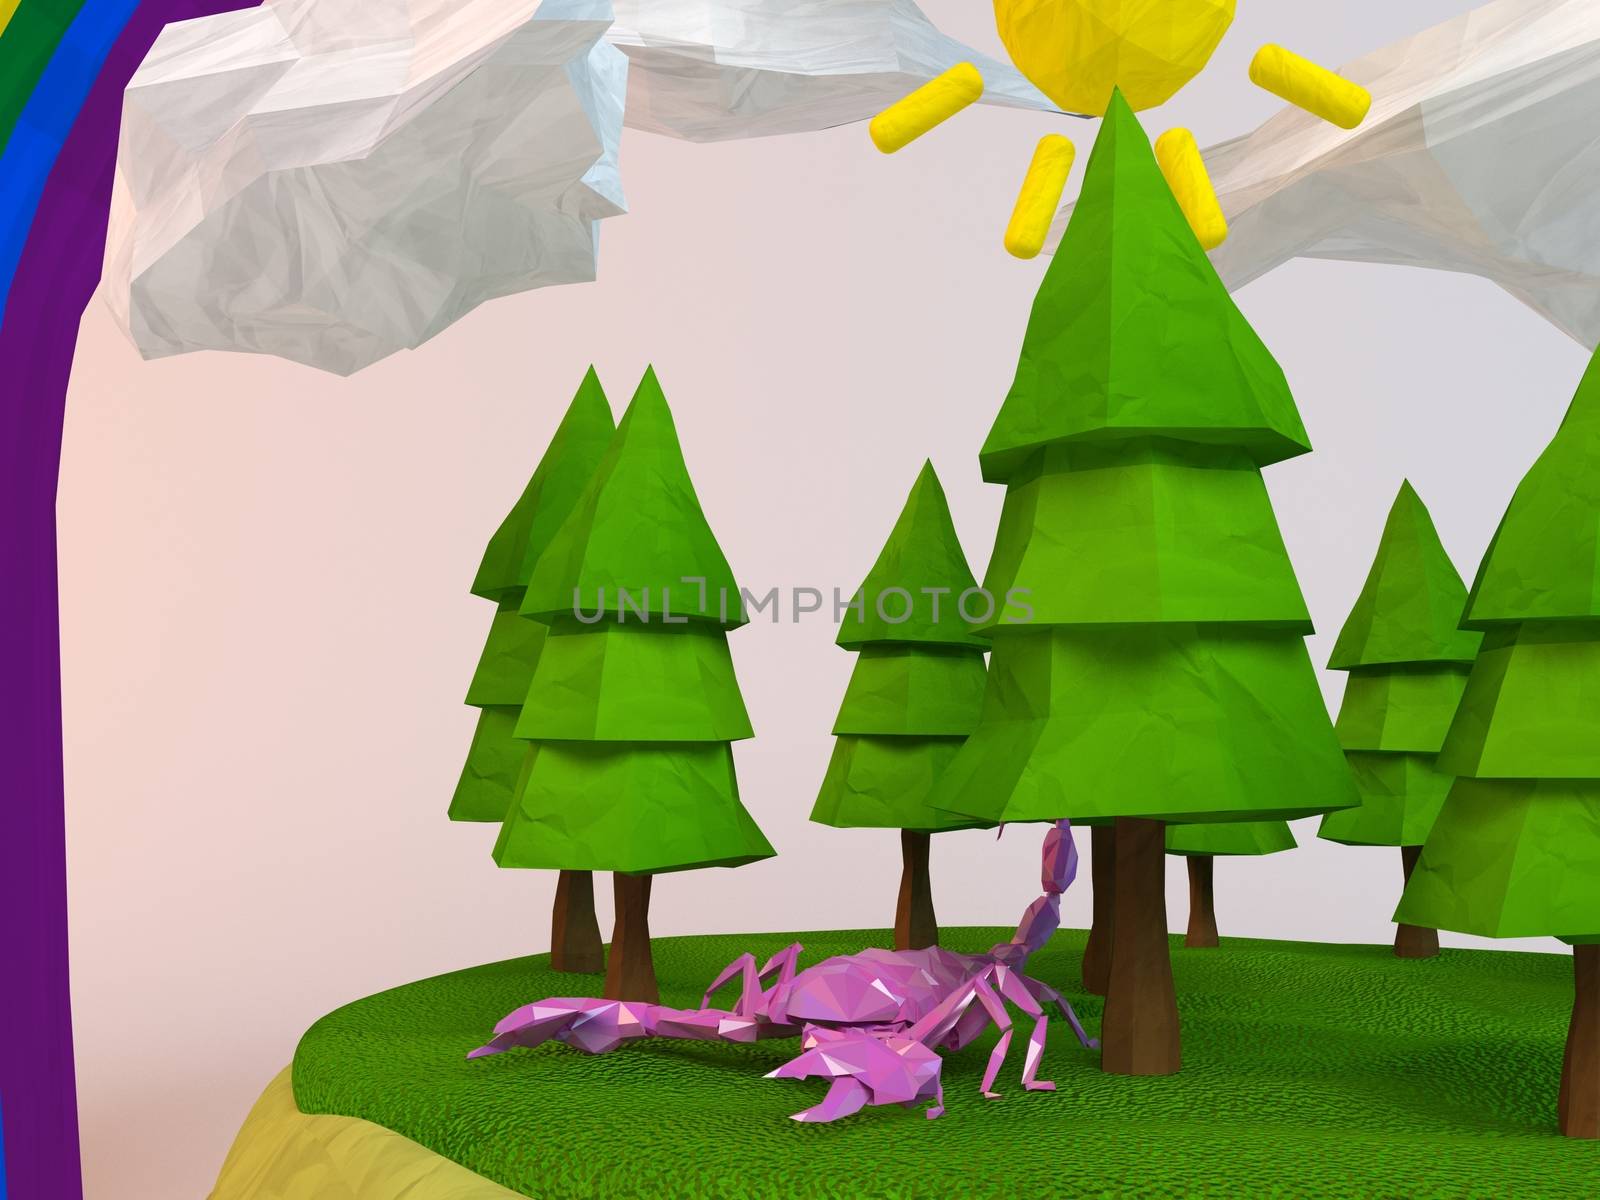 3d scorpion inside a low-poly green scene by fares139